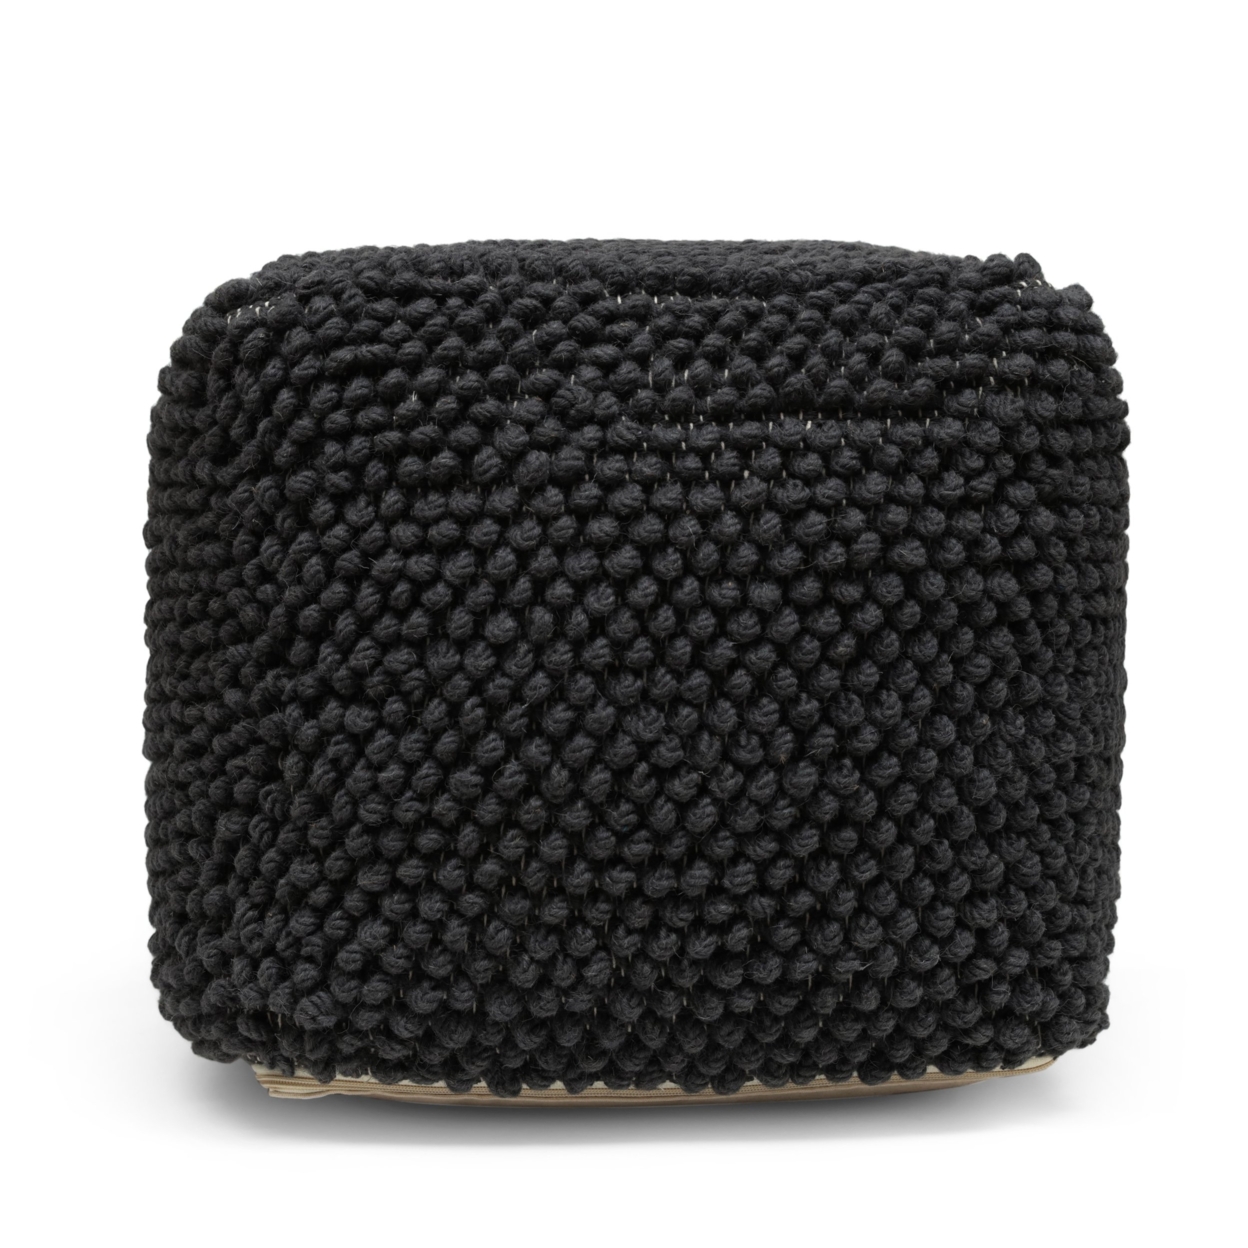 Devries Boho Handcrafted Tufted Fabric Cube Pouf - Charcoal